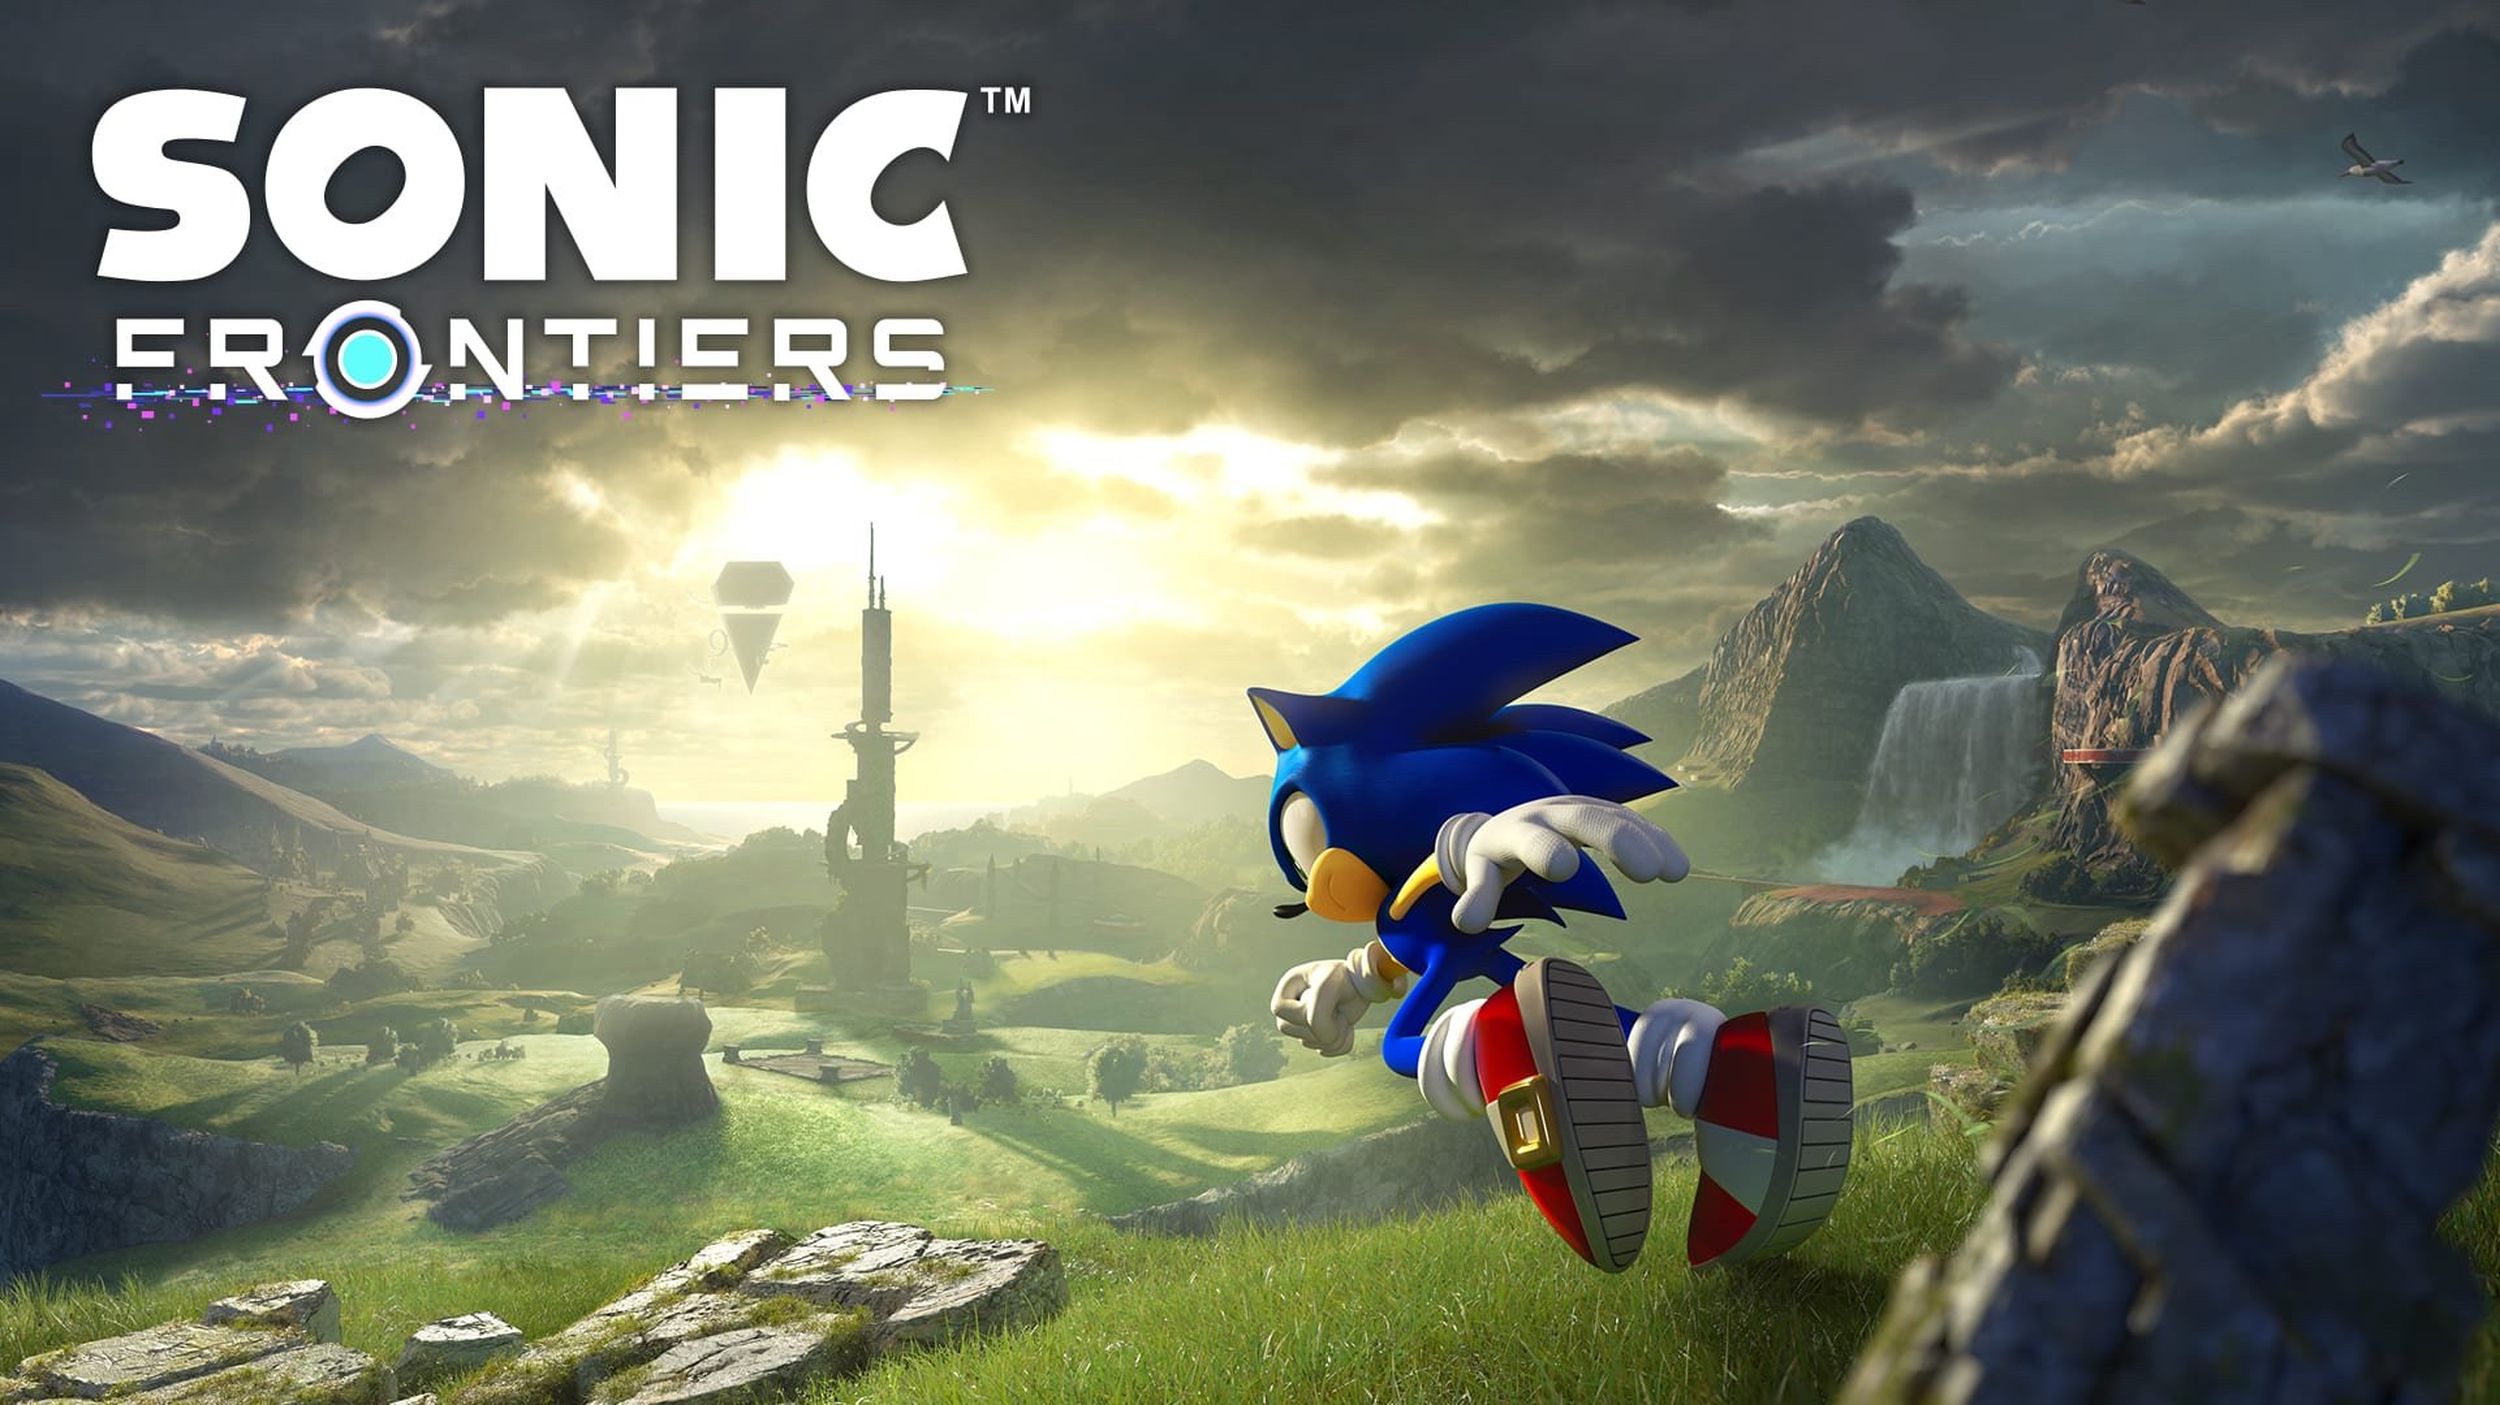 Sonic Frontiers PlayStation 5 and Sonic The Hedgehog 2 Movie